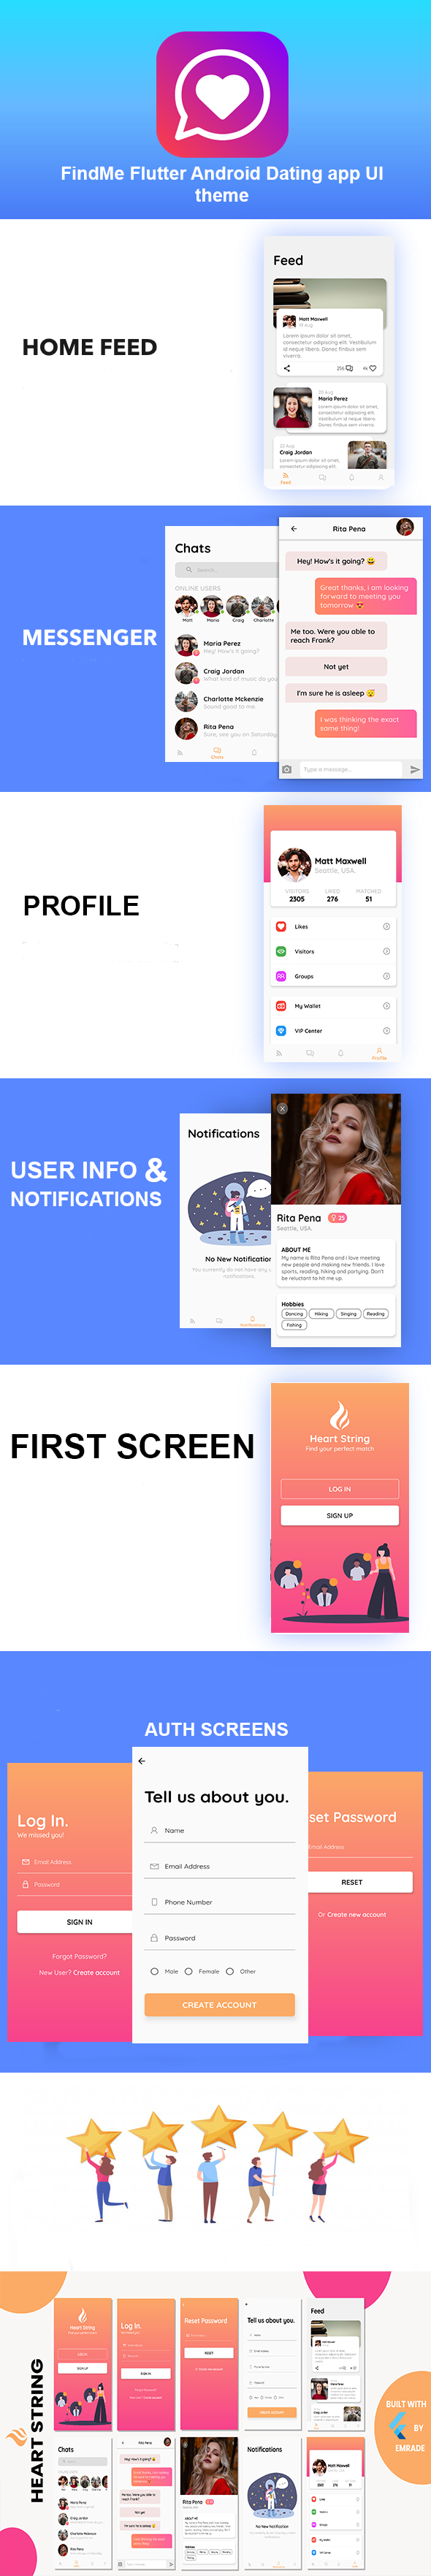 FindMe Flutter Android Dating app UI theme - 1